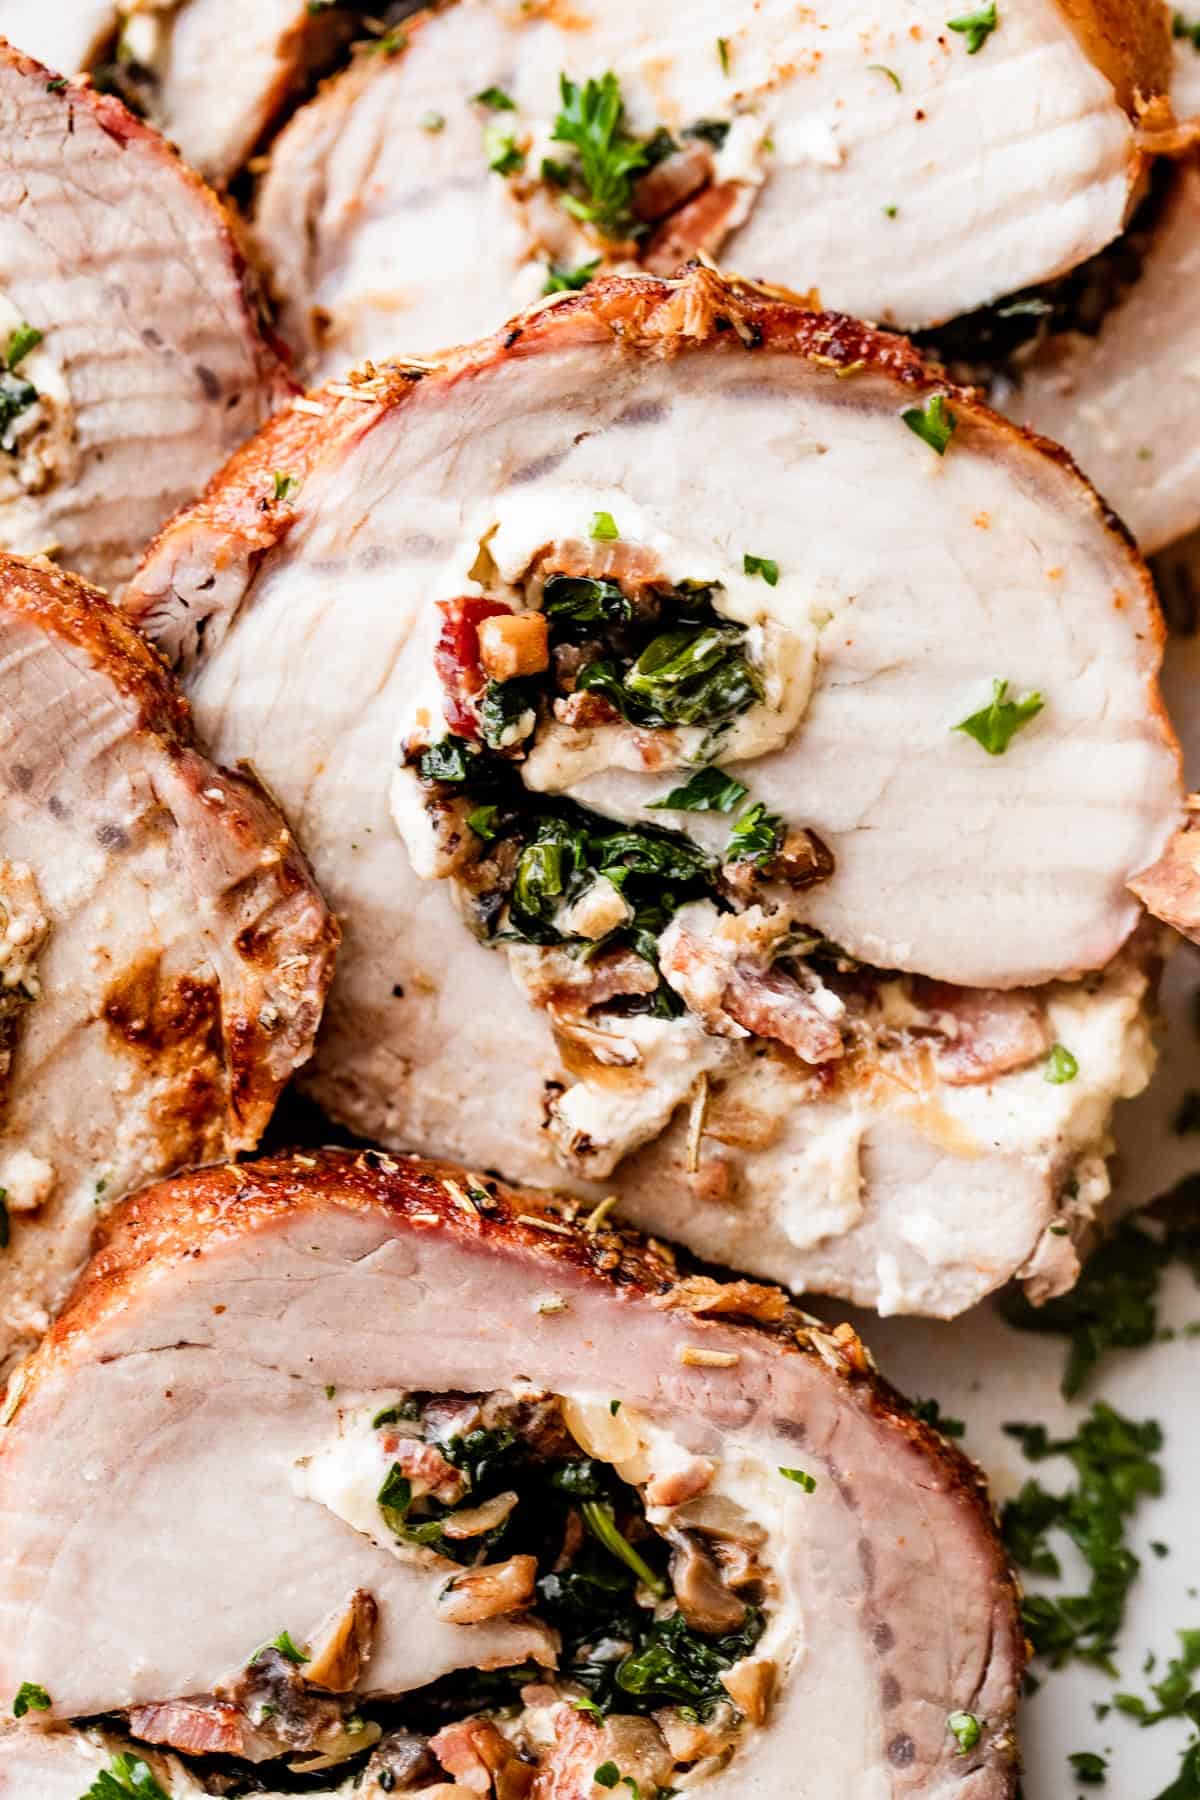 up close shot of stuffed pork loin cut into slices.